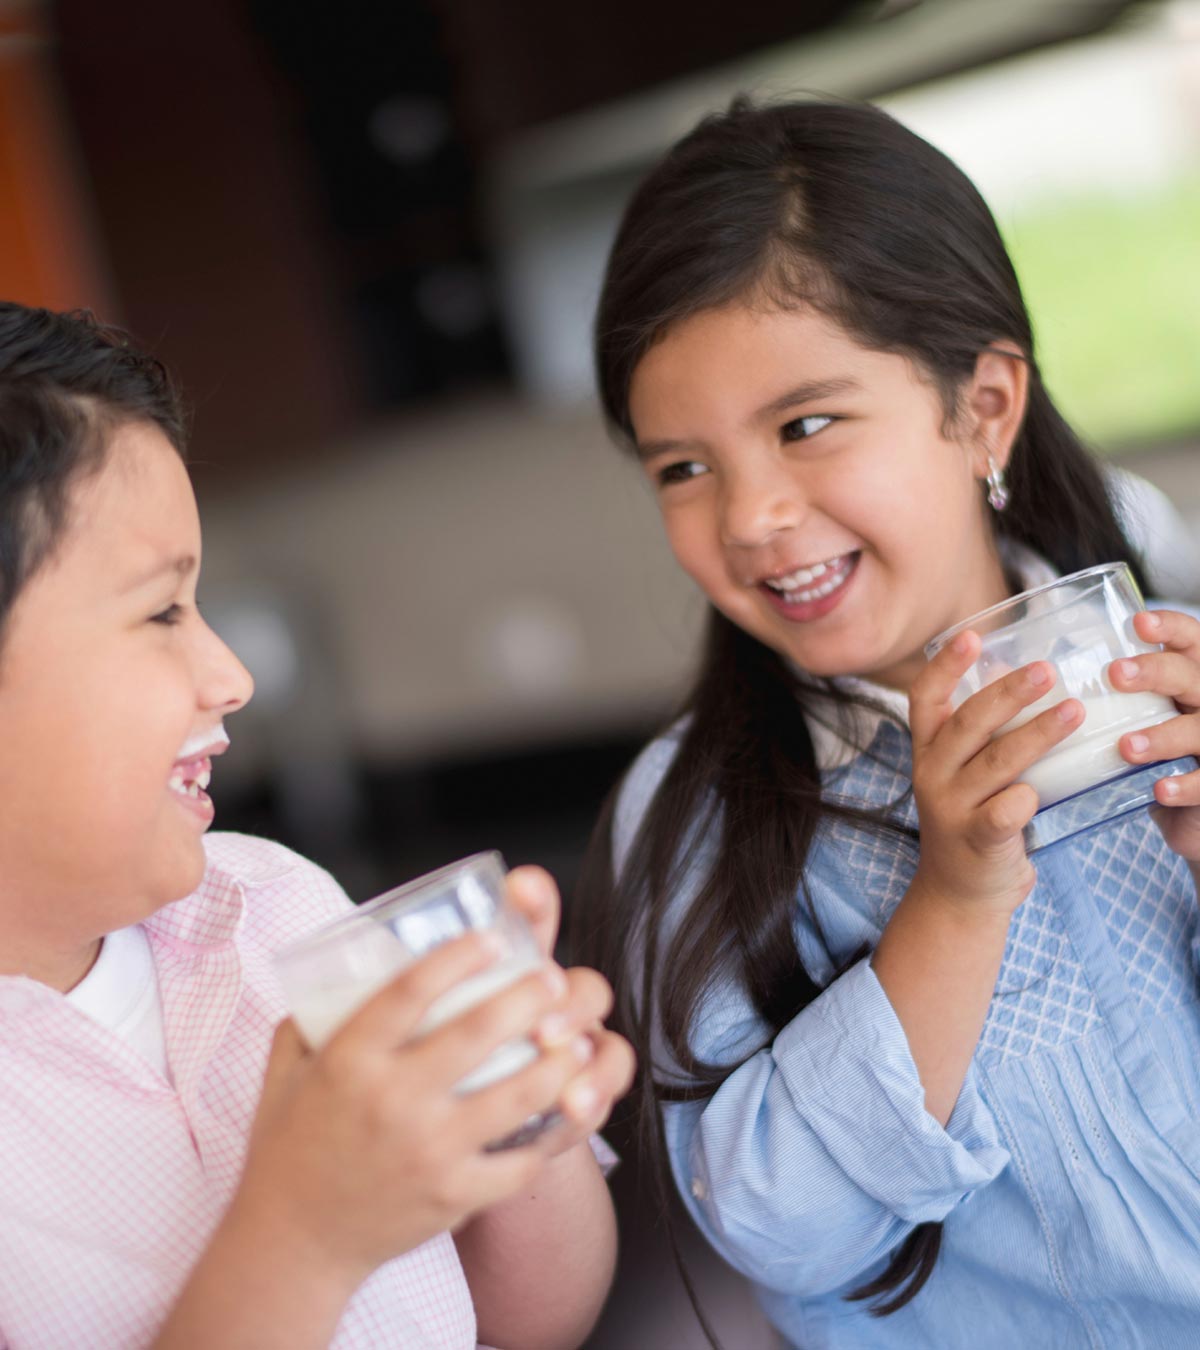 Probiotics For Kids: Types, Benefits  And Side Effects